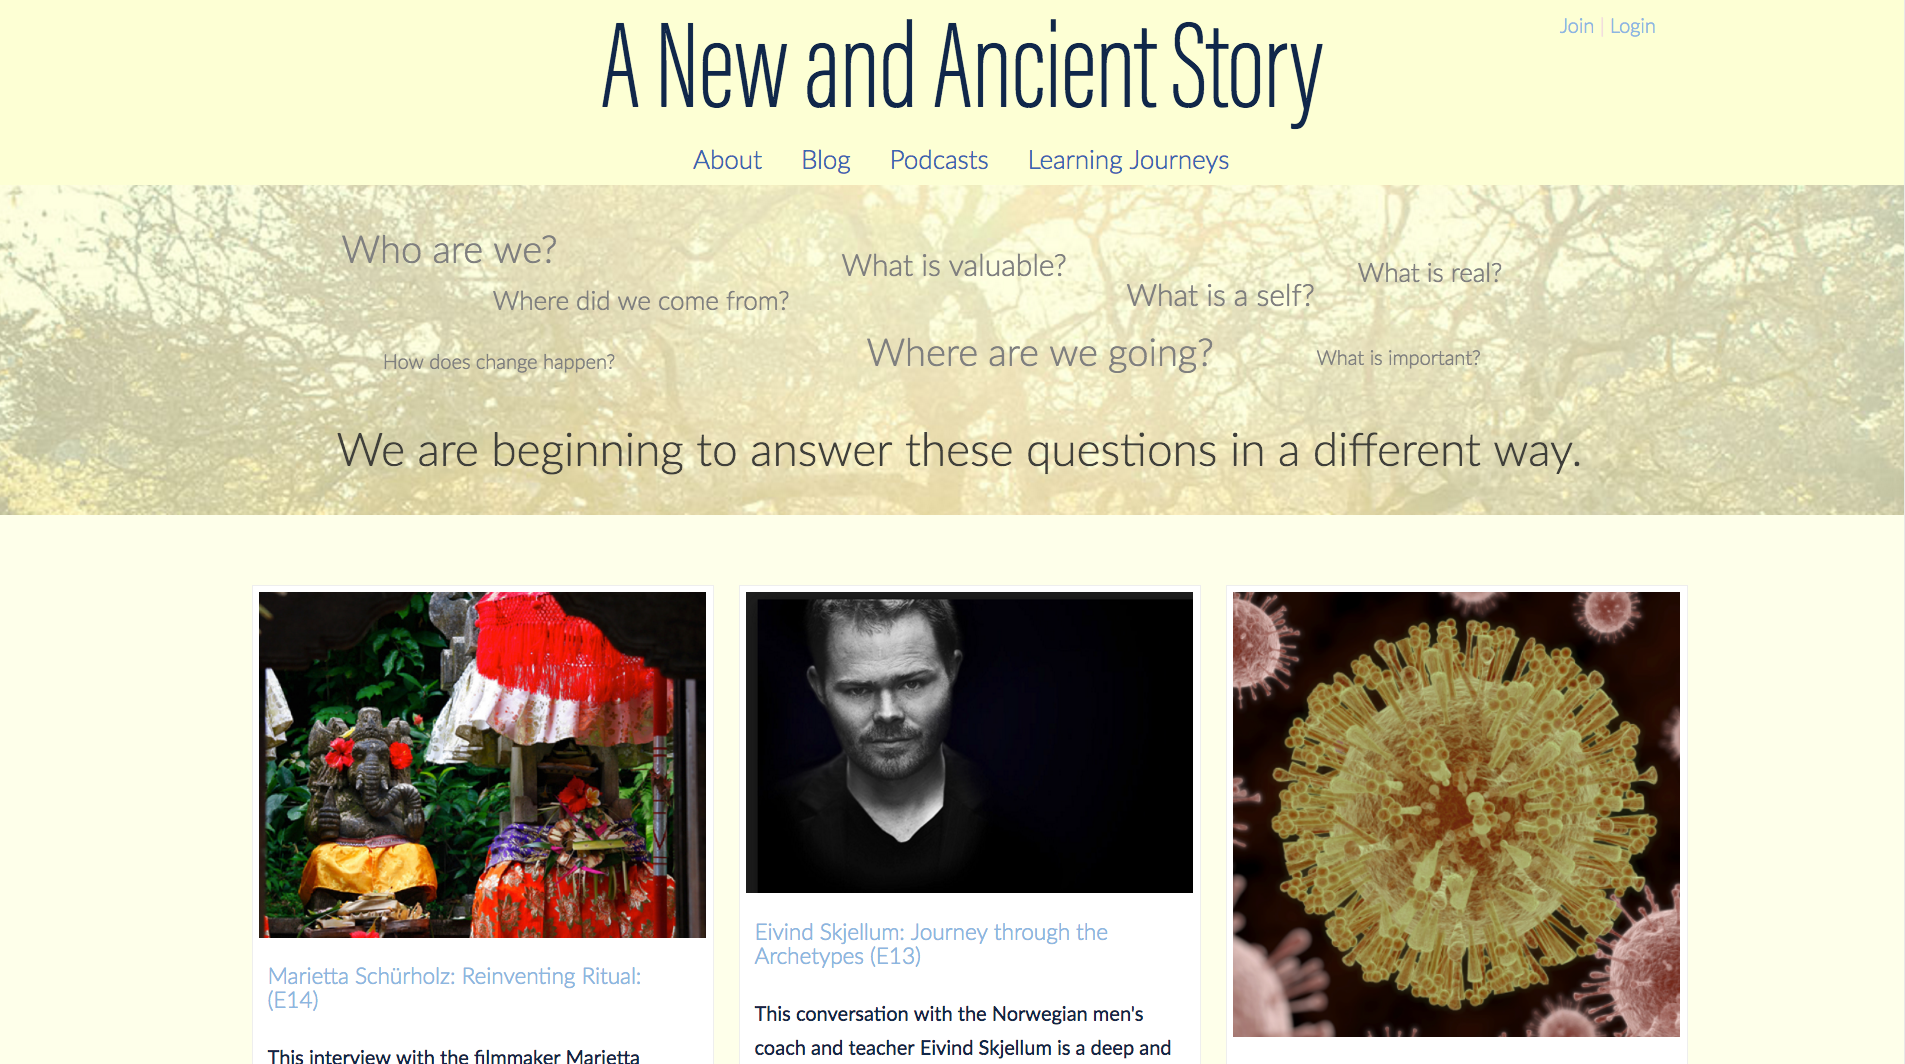 Website for A New and Ancient Story, designed by Adrian Hoppel